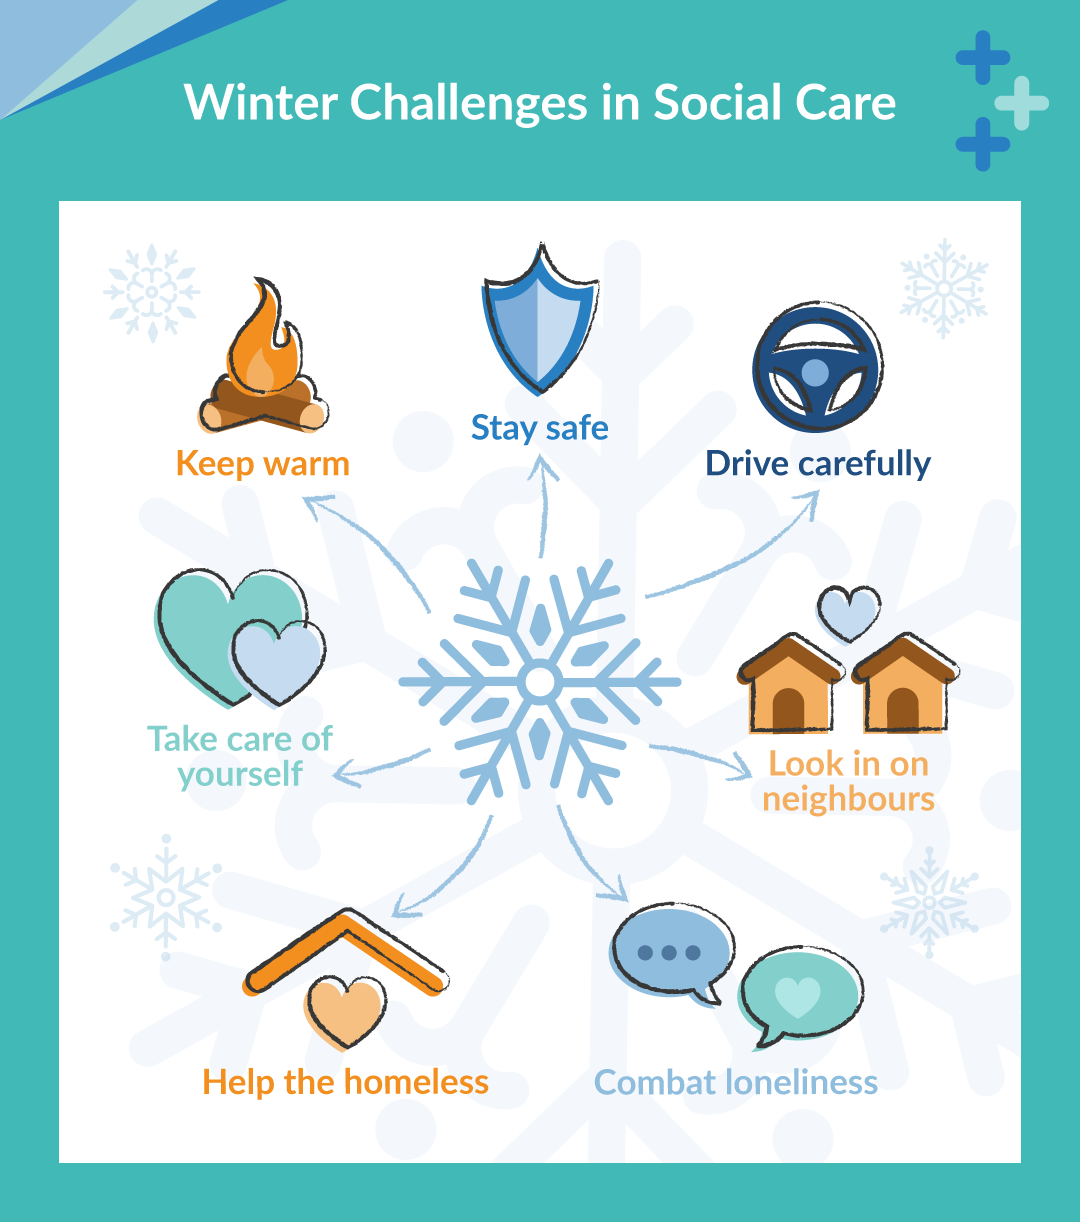 Winter Challenges in Social Care